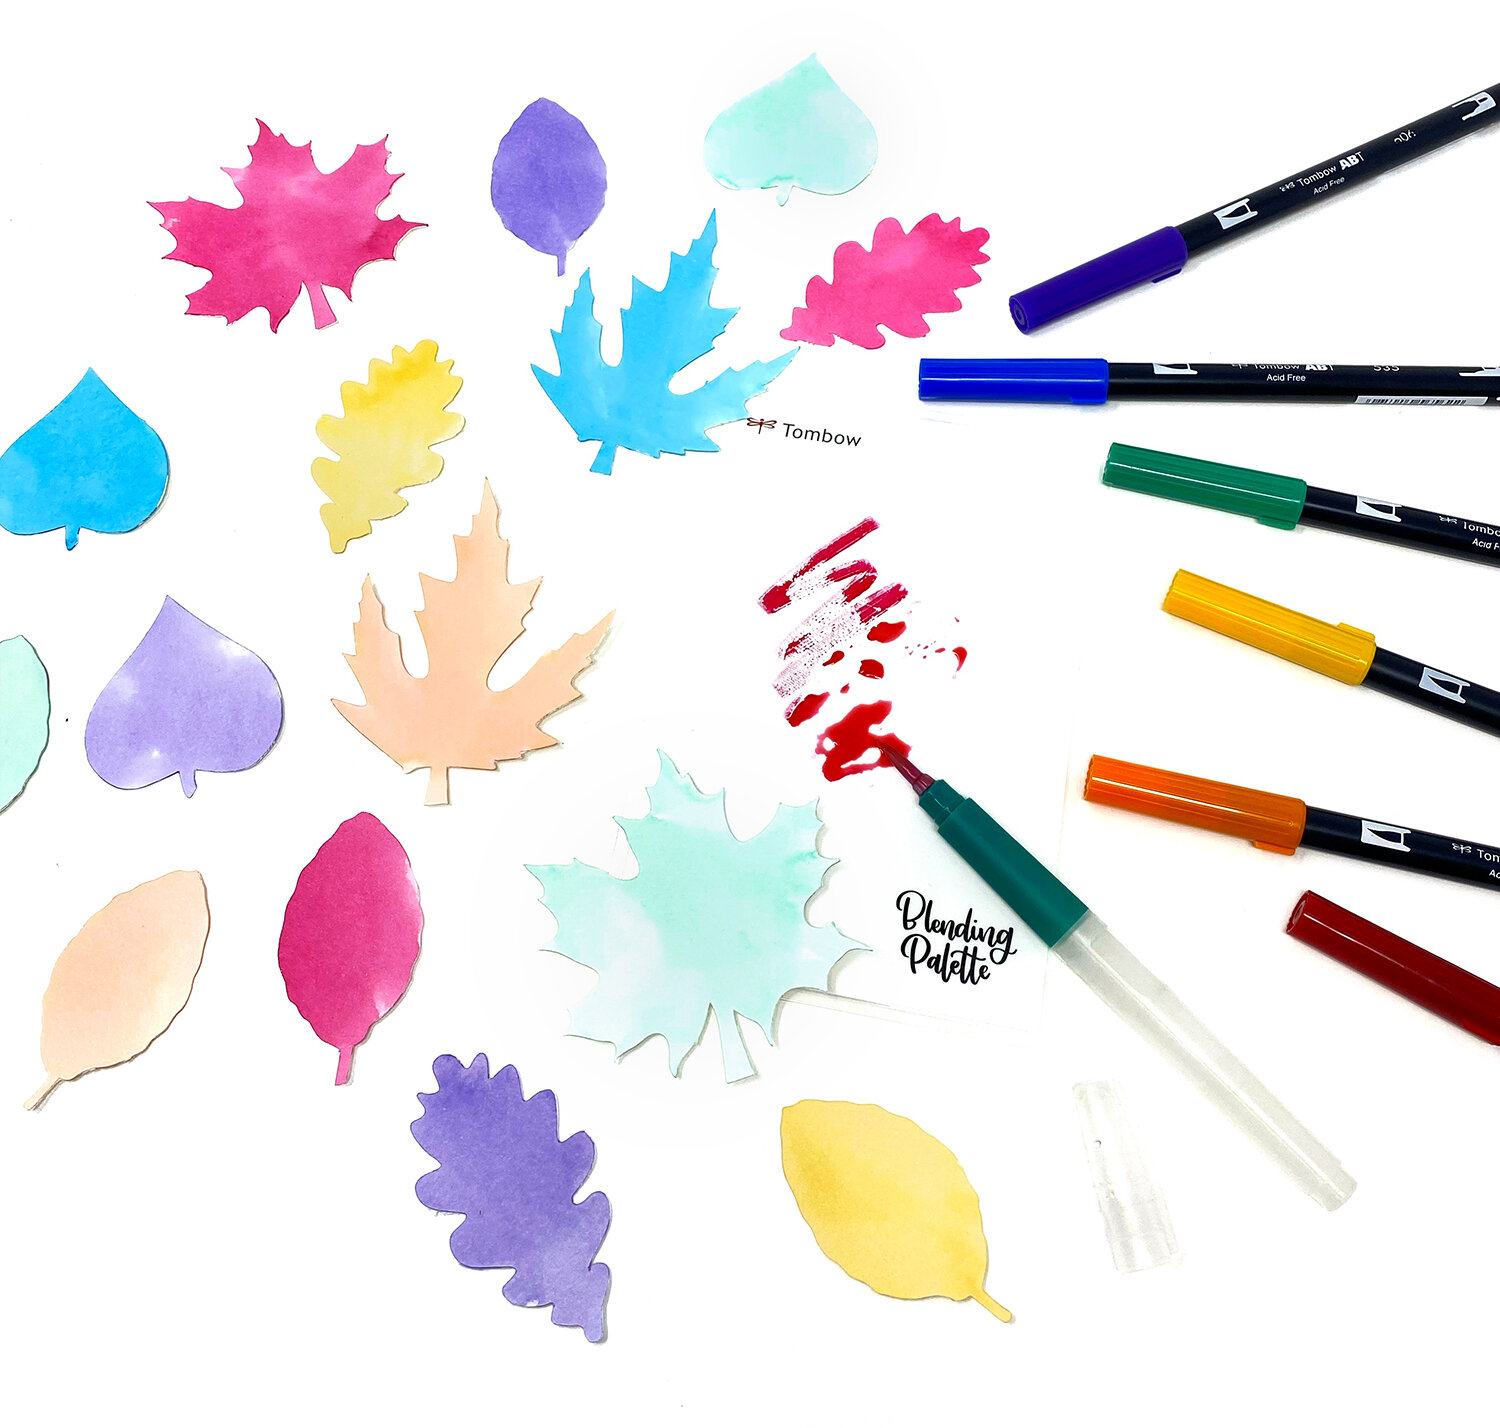 Tombow Fudenosuke Brush Pen 2 Pack - Hard and Soft - Wet Paint Artists'  Materials and Framing